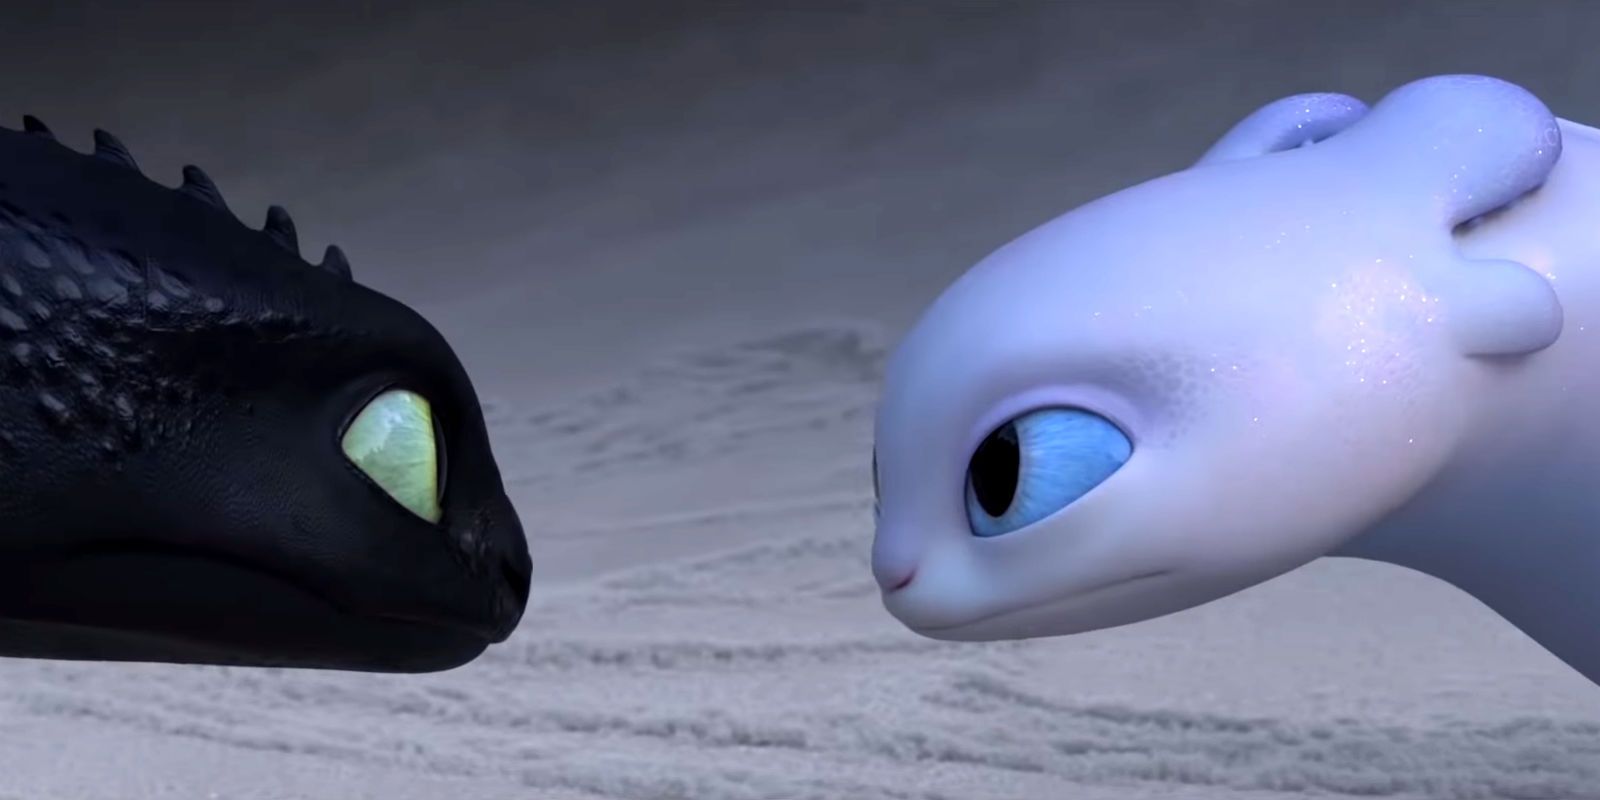 How to Train Your Dragon 3 - Toothless and Light Fury